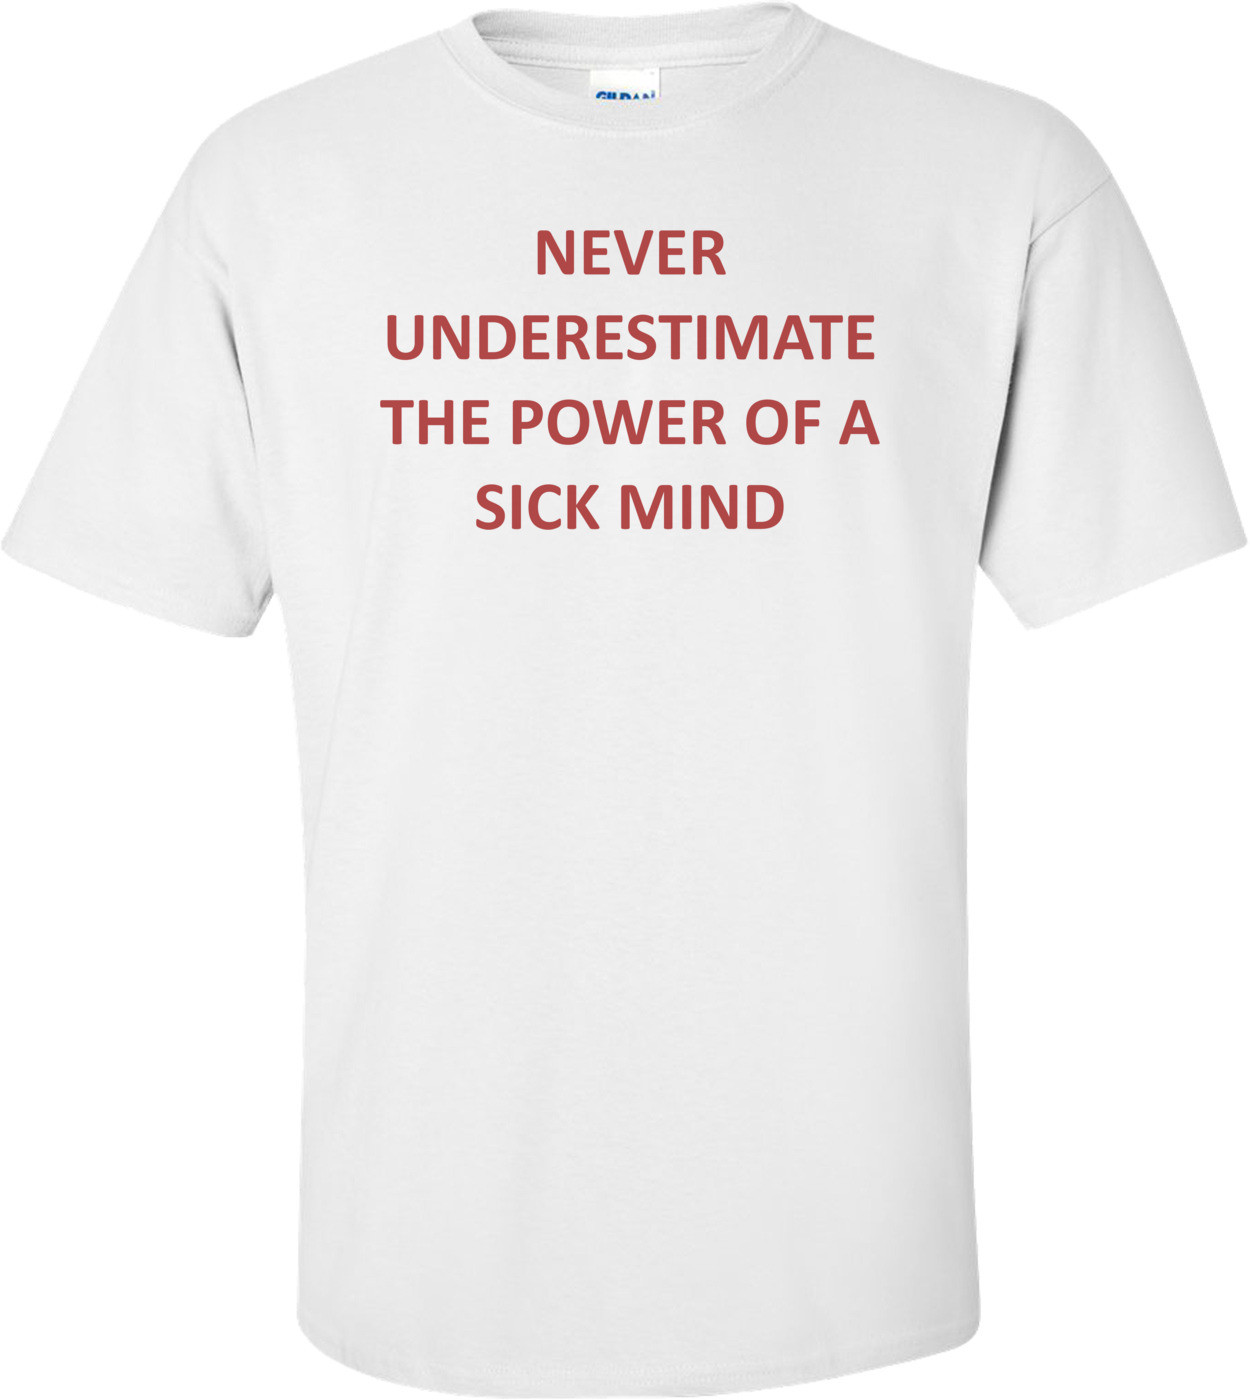 NEVER UNDERESTIMATE THE POWER OF A SICK MIND